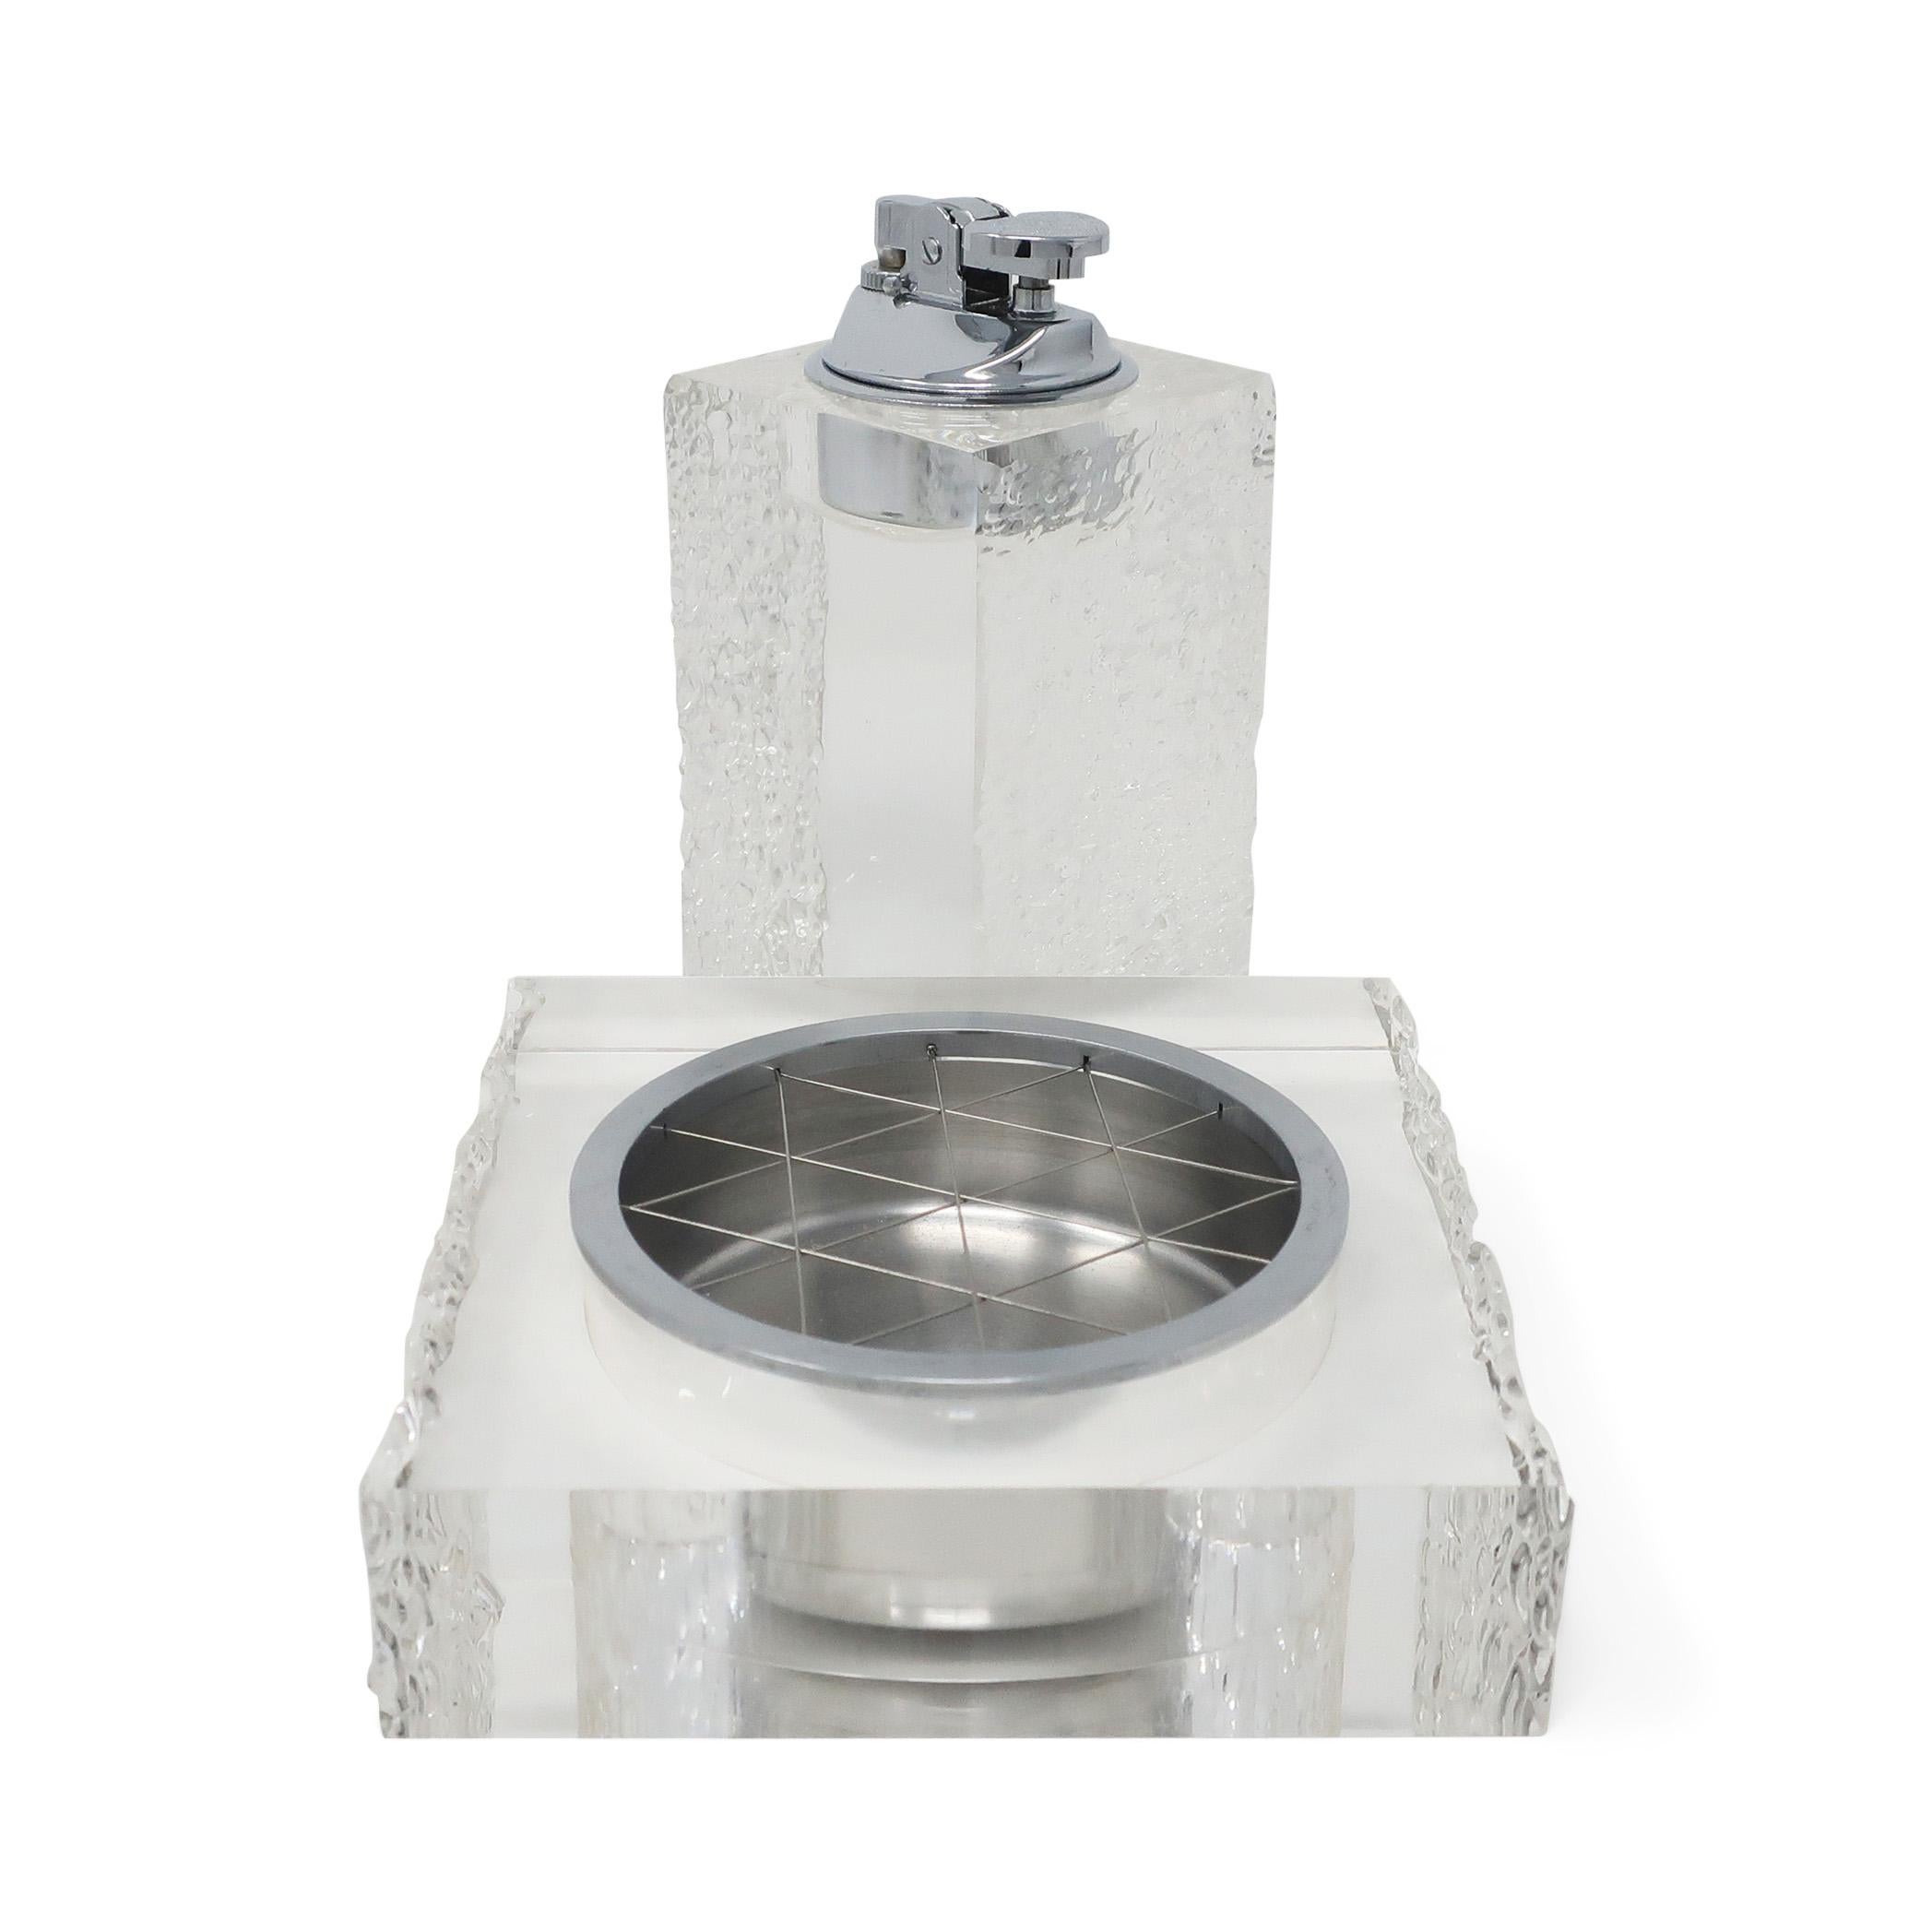 A Mid-Century Modern lucite lighter and ashtray set in the style of Felice Antonio Botta. The tall table lighter has two textured and two polished sides with a polished chrome lighter insert with new flint. The ashtray has matching textured and